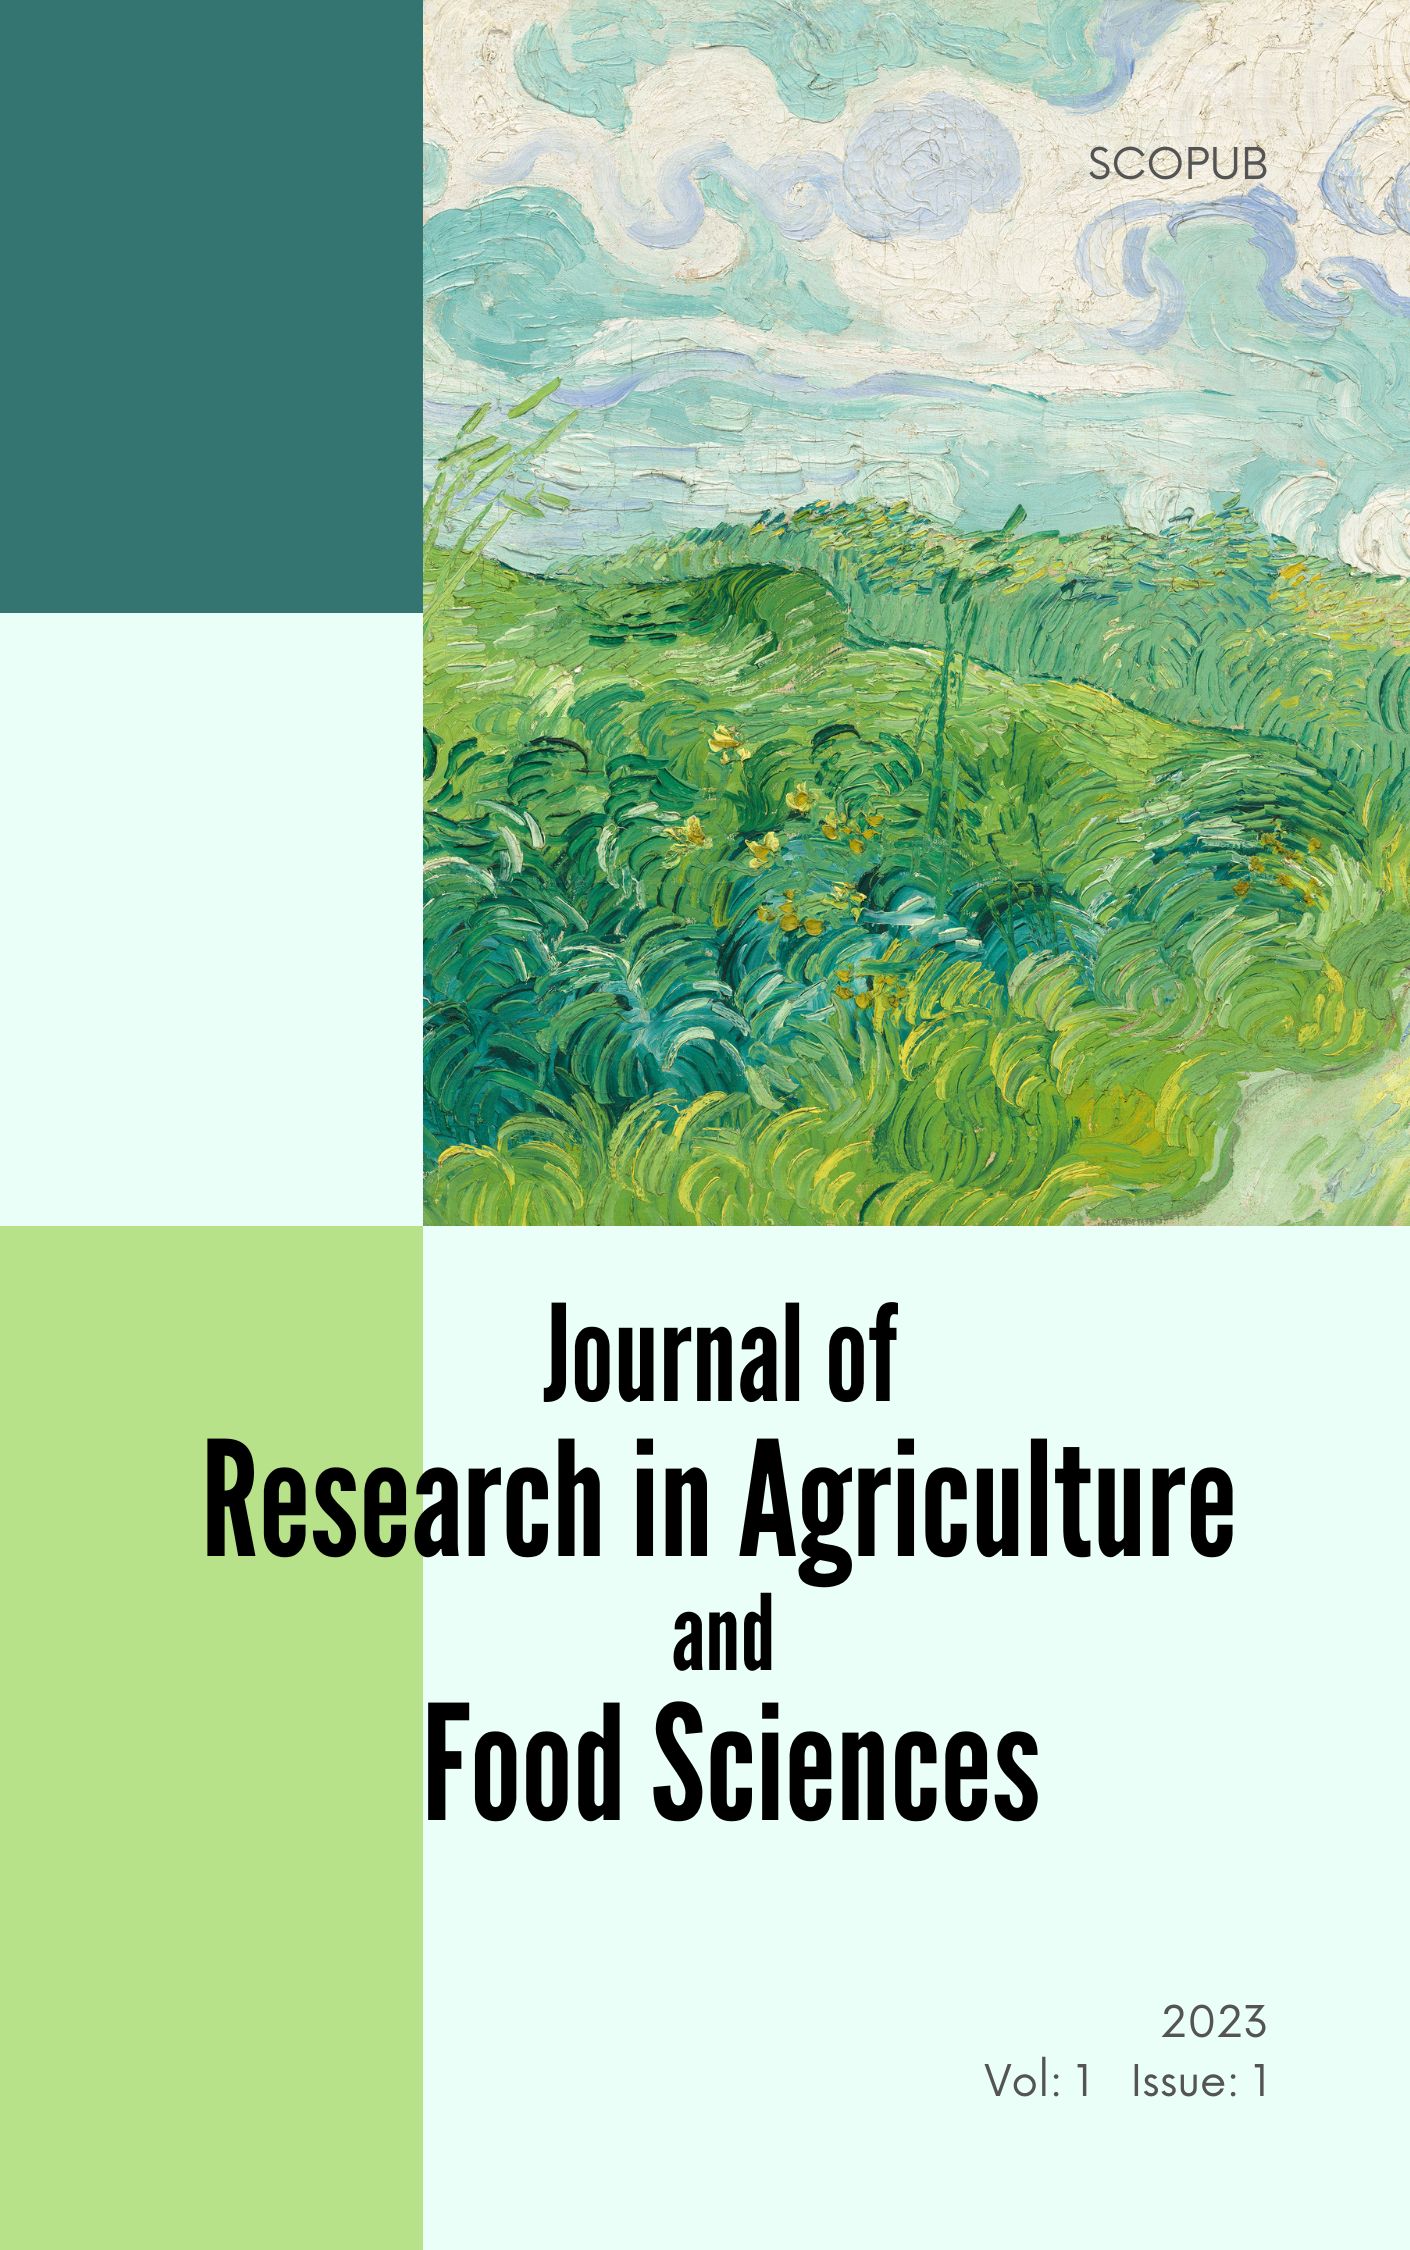 Journal of Research in Agriculture and Food Sciences